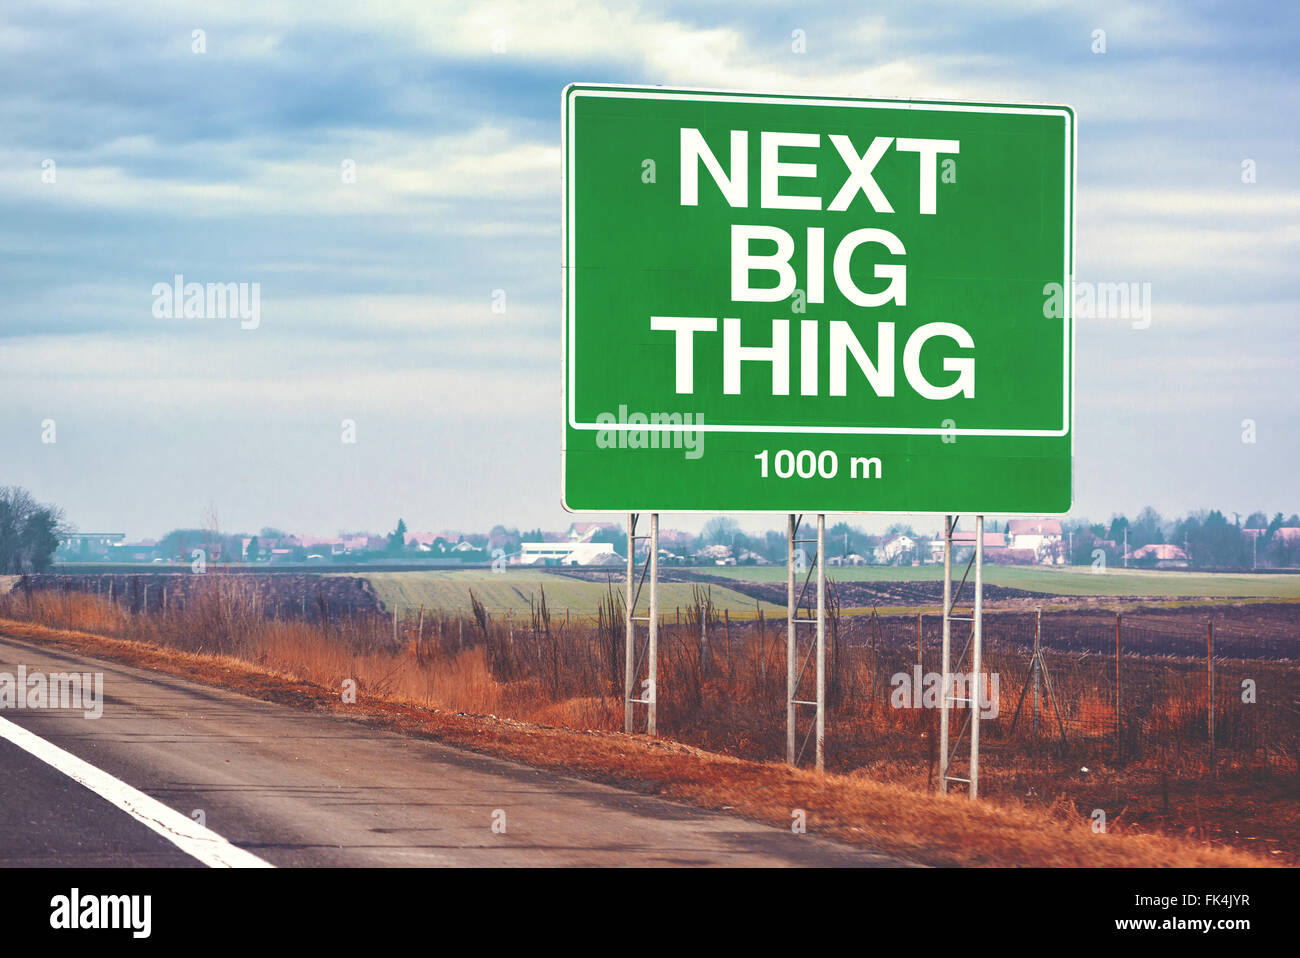 Next big thing ahead conceptual motivational image with road sign by the highway, retro toned image with selective focus Stock Photo